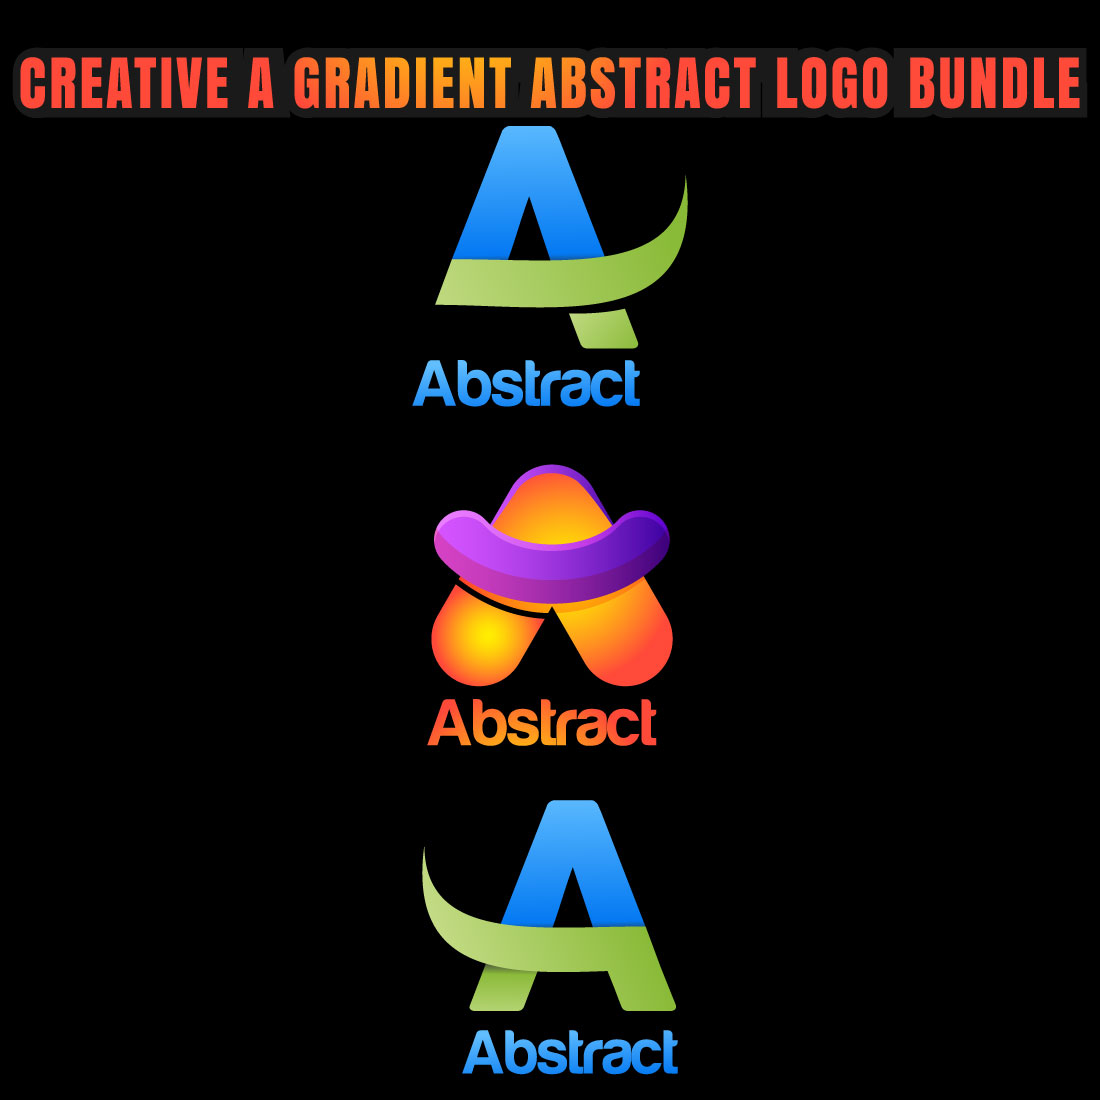 9 Creative A Gradient Abstract Logo Bundle for your company.